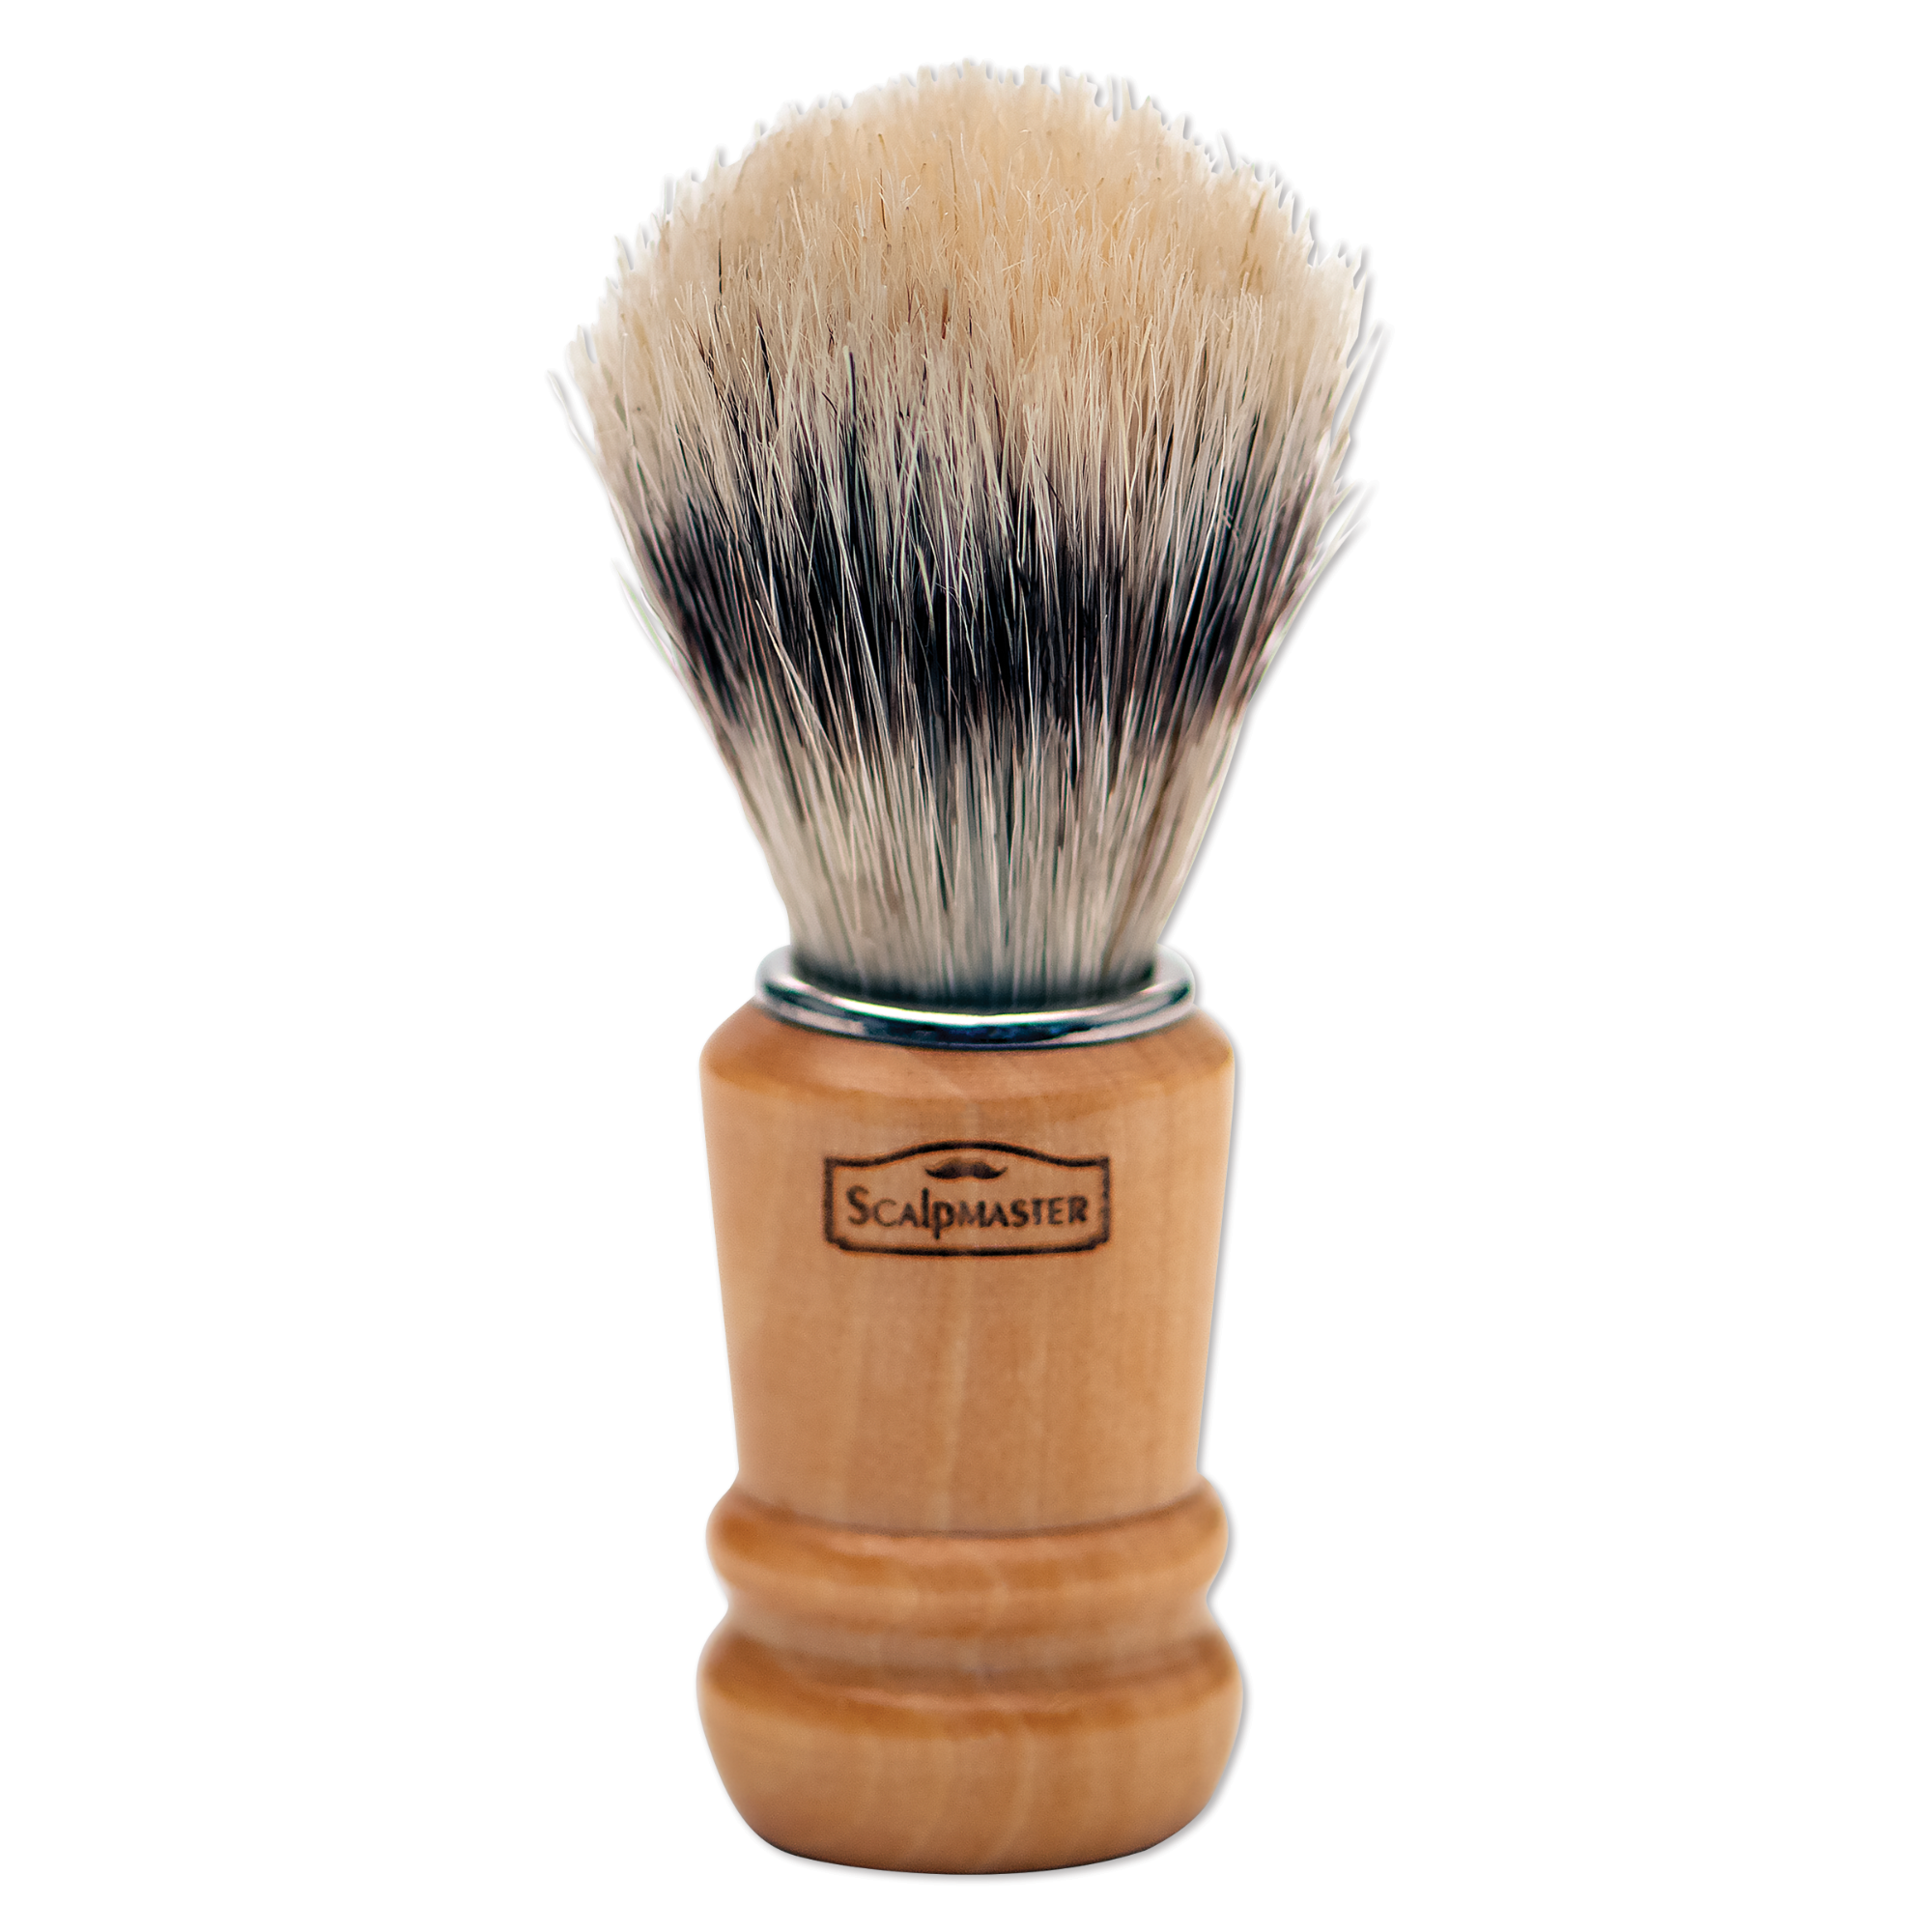 Shaving Brush with Wooden Handle and Boar Bristles